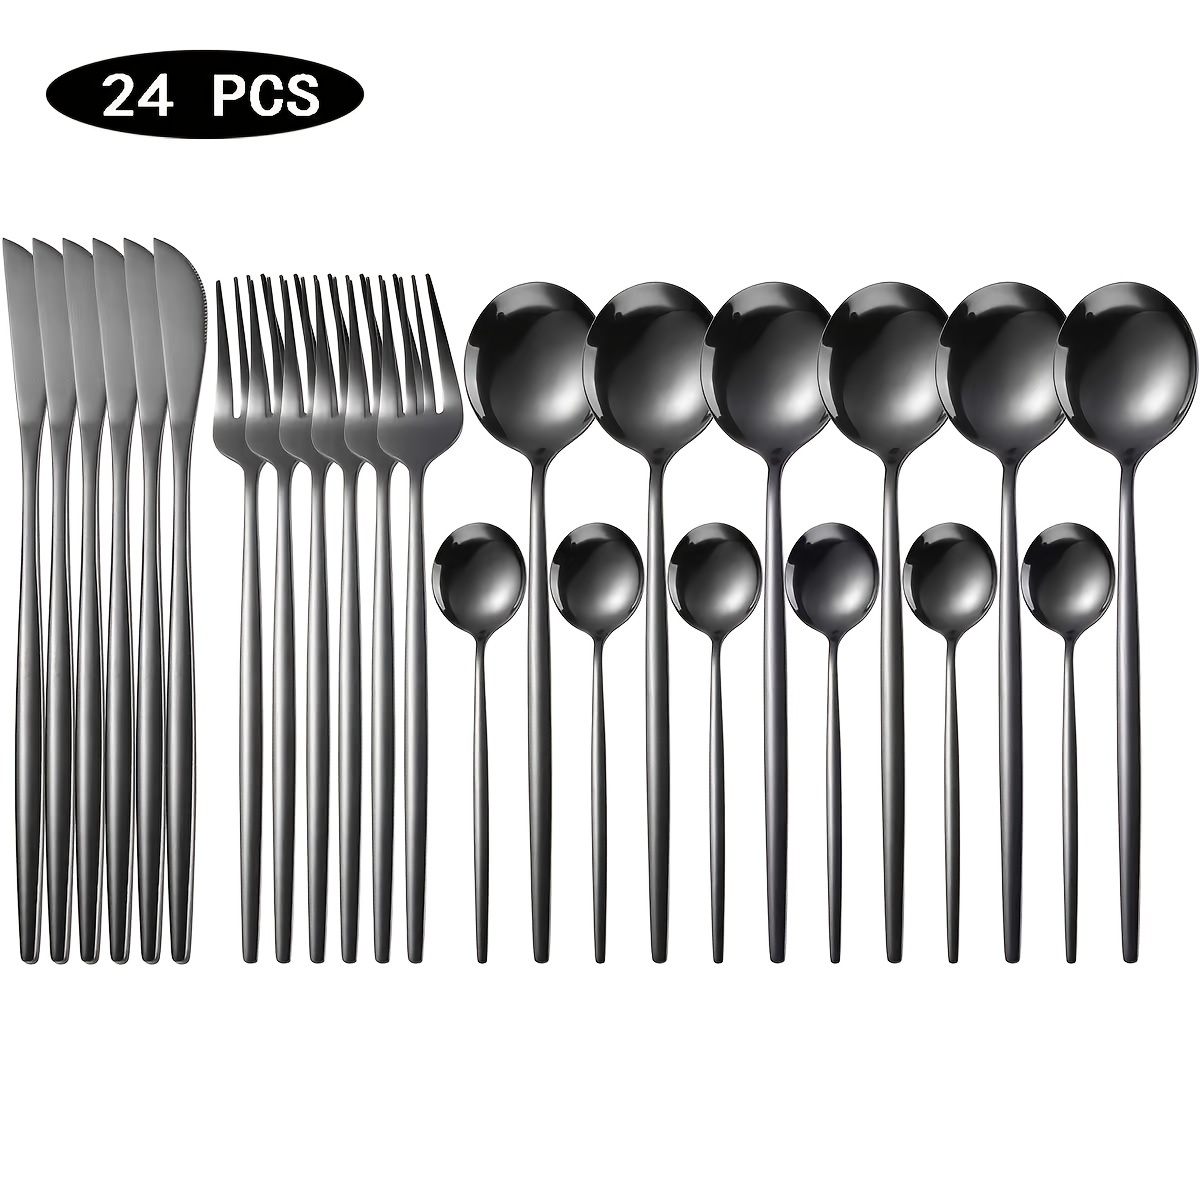 Silverware Sets, JOW 20 Pieces Stainless Steel Flatware Set Service for 4,  Tableware Cutlery Set for Home and Restaurant, Knives Forks Spoons, Mirror